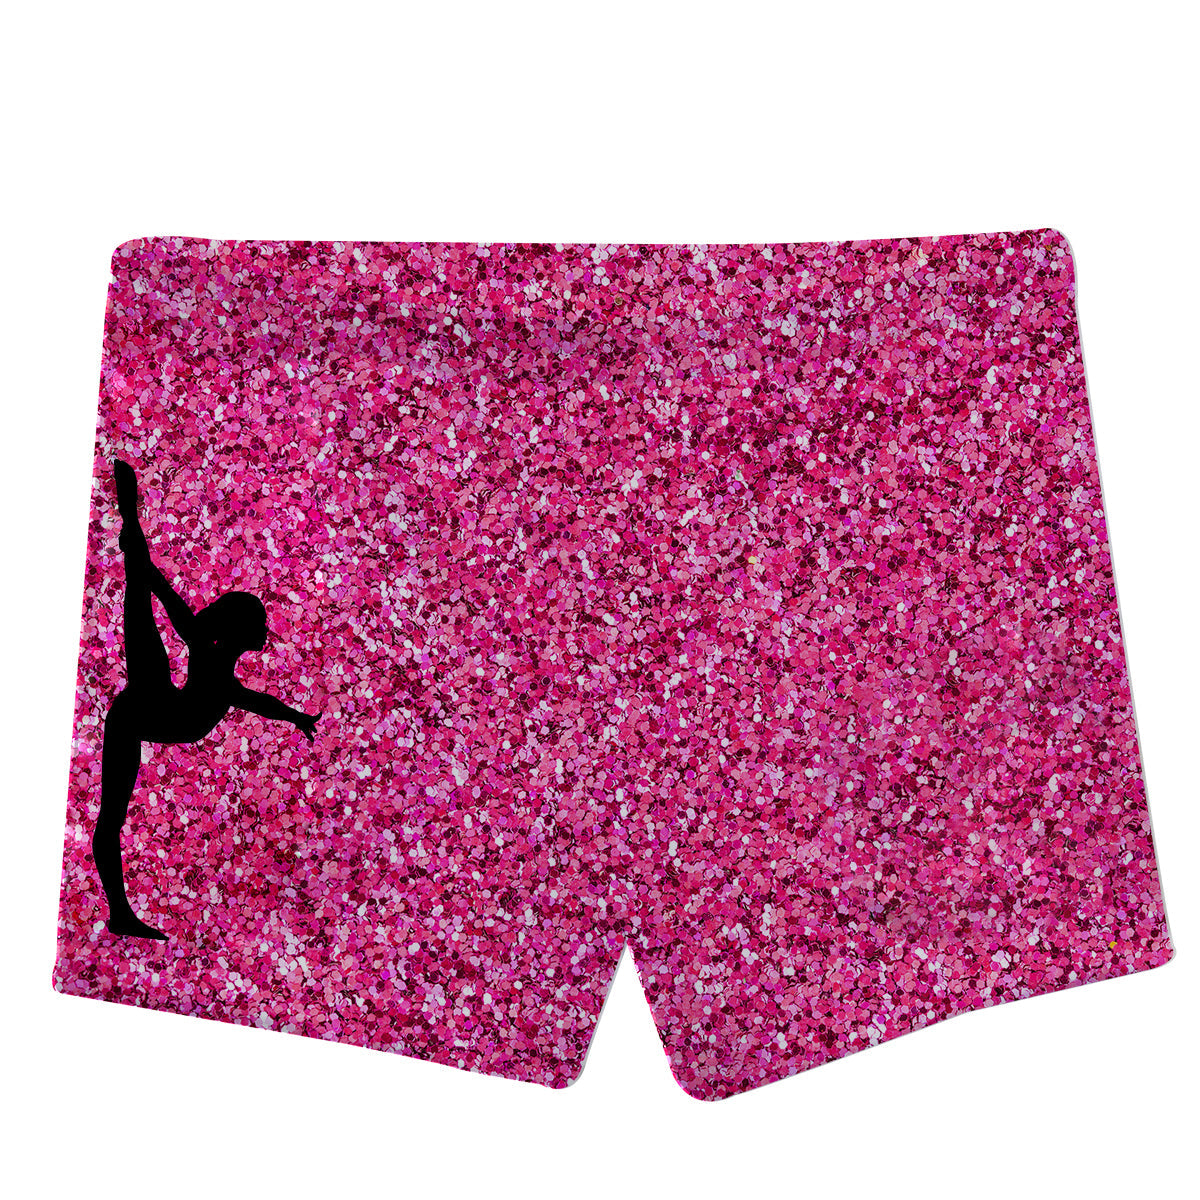 Hot pink glitter gymnast shorts with monogram - Wimziy&Co.